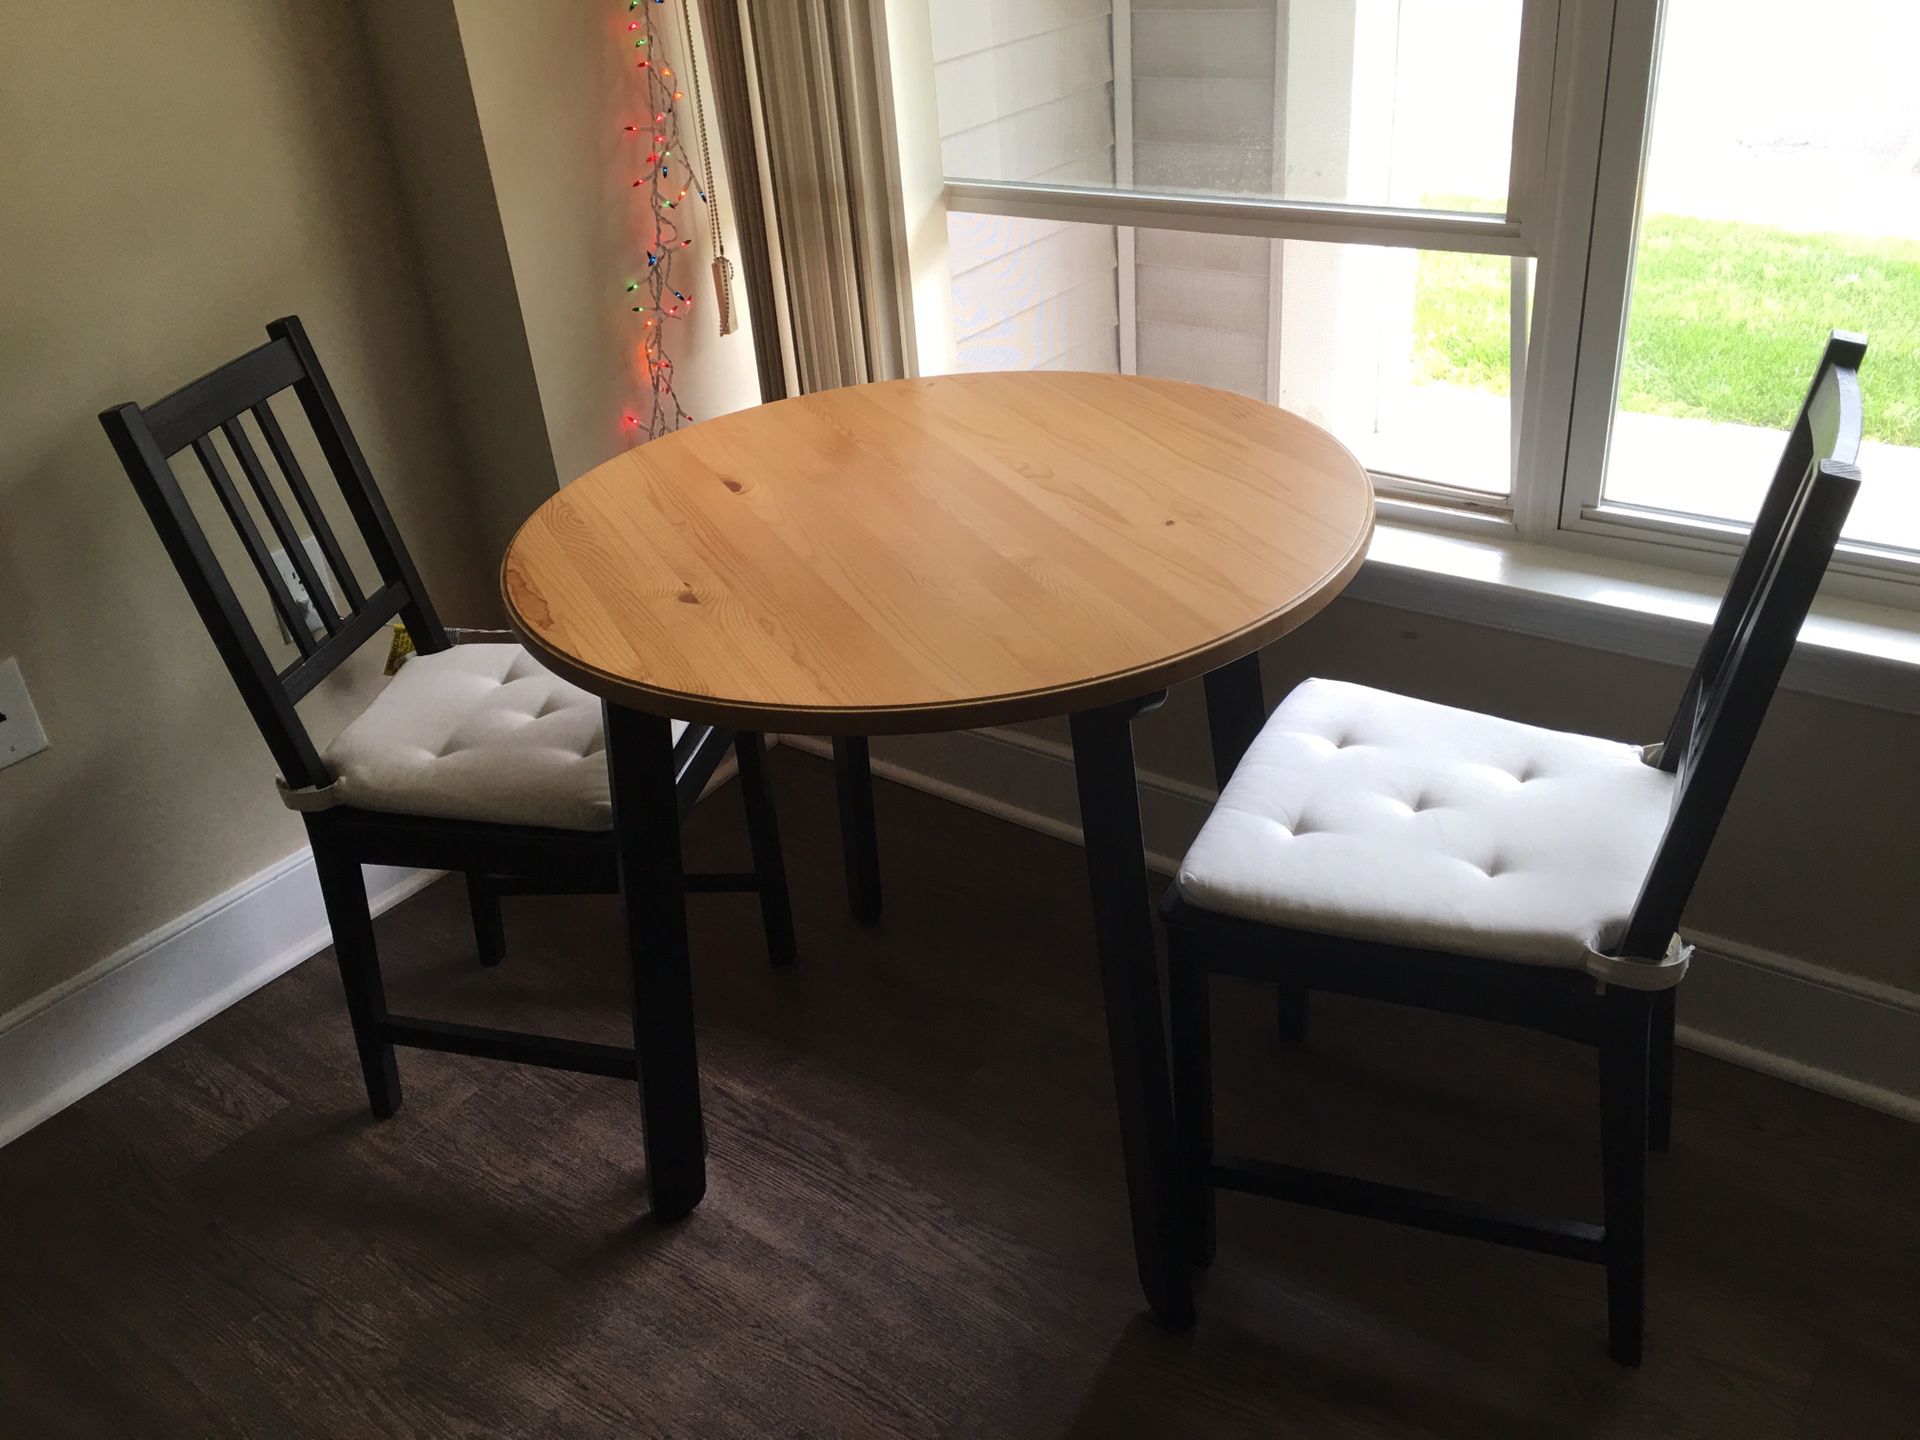 Dining table set(round table, 2 chairs, 2 cushions)